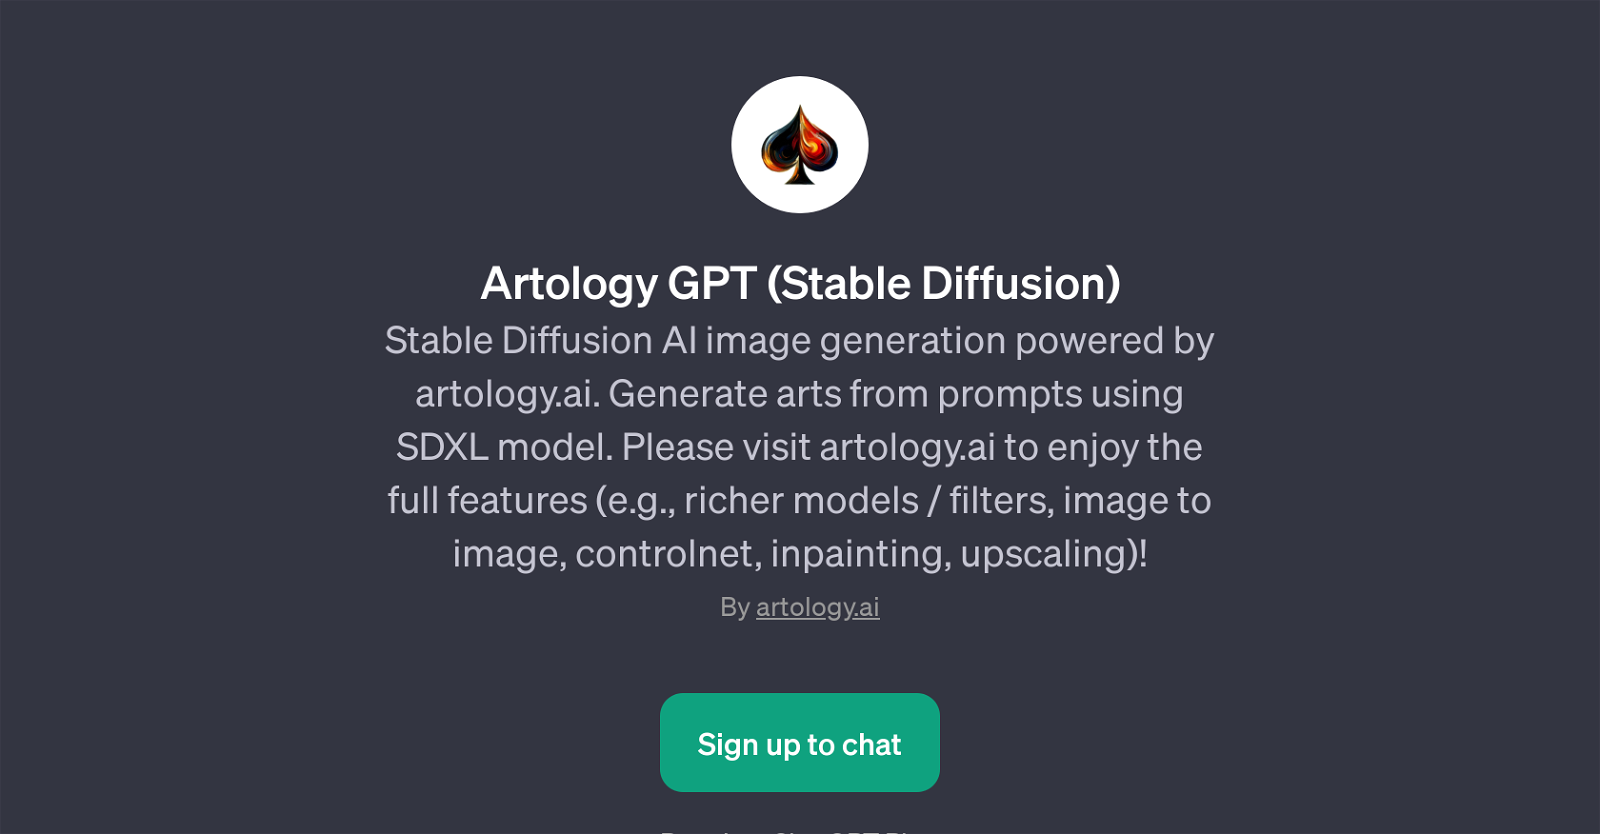 Artology GPT (Stable Diffusion) website